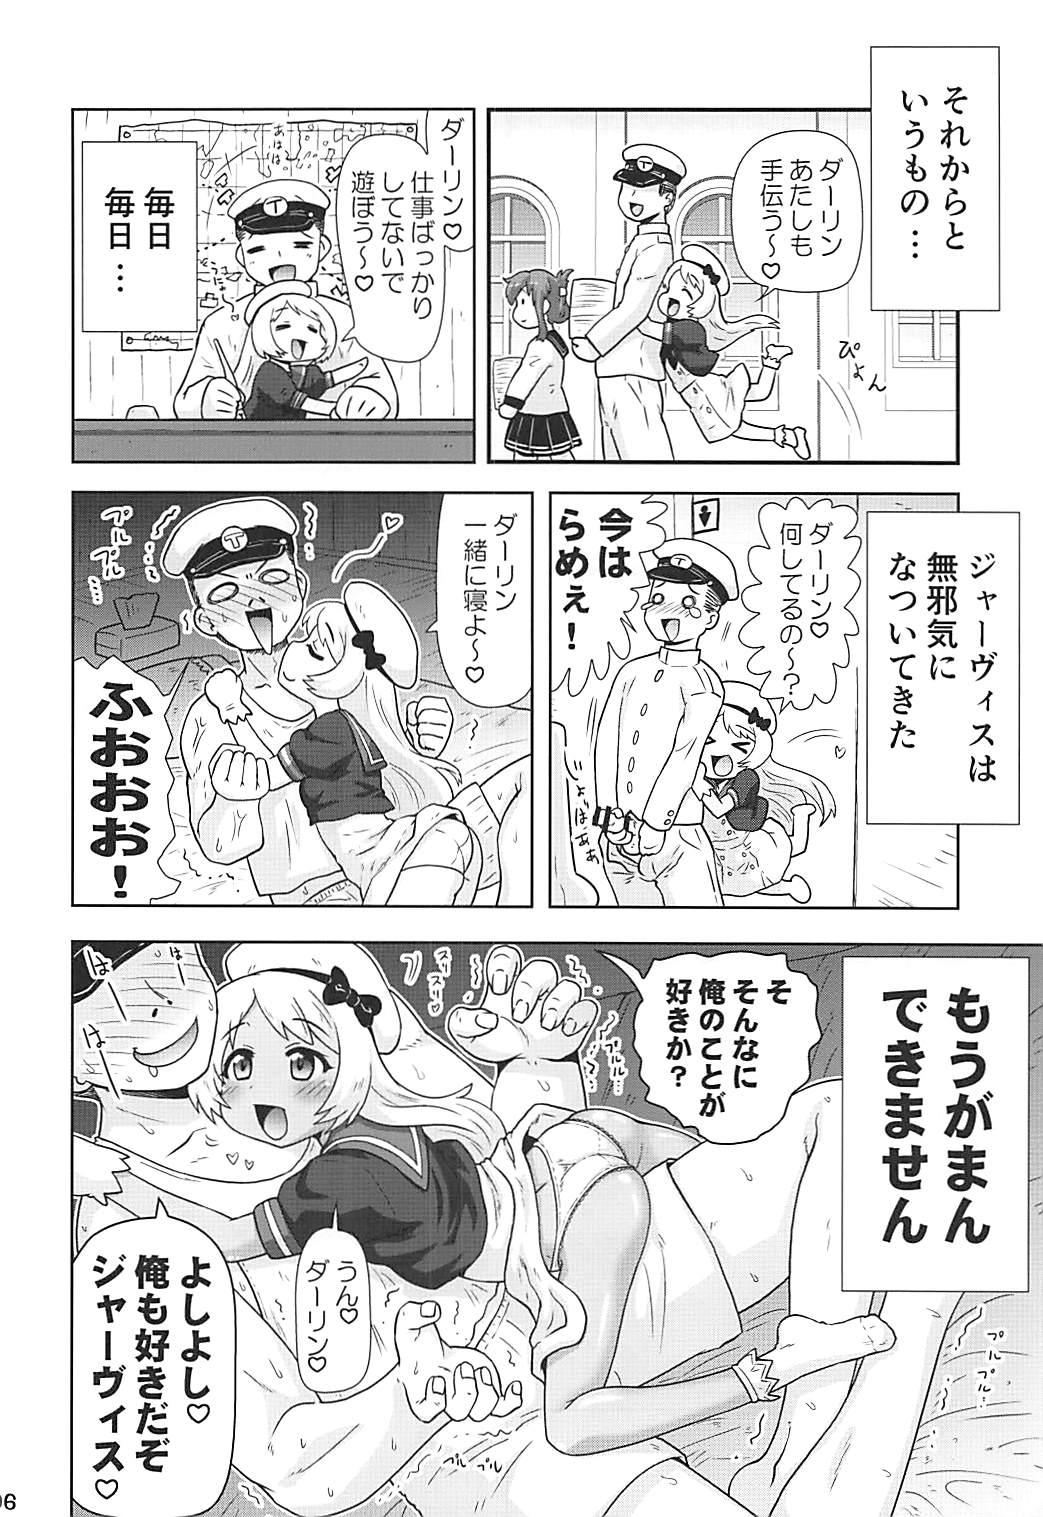 Chacal Jervis to Otona no Darling Kankei - Kantai collection Hard Sex - Page 5